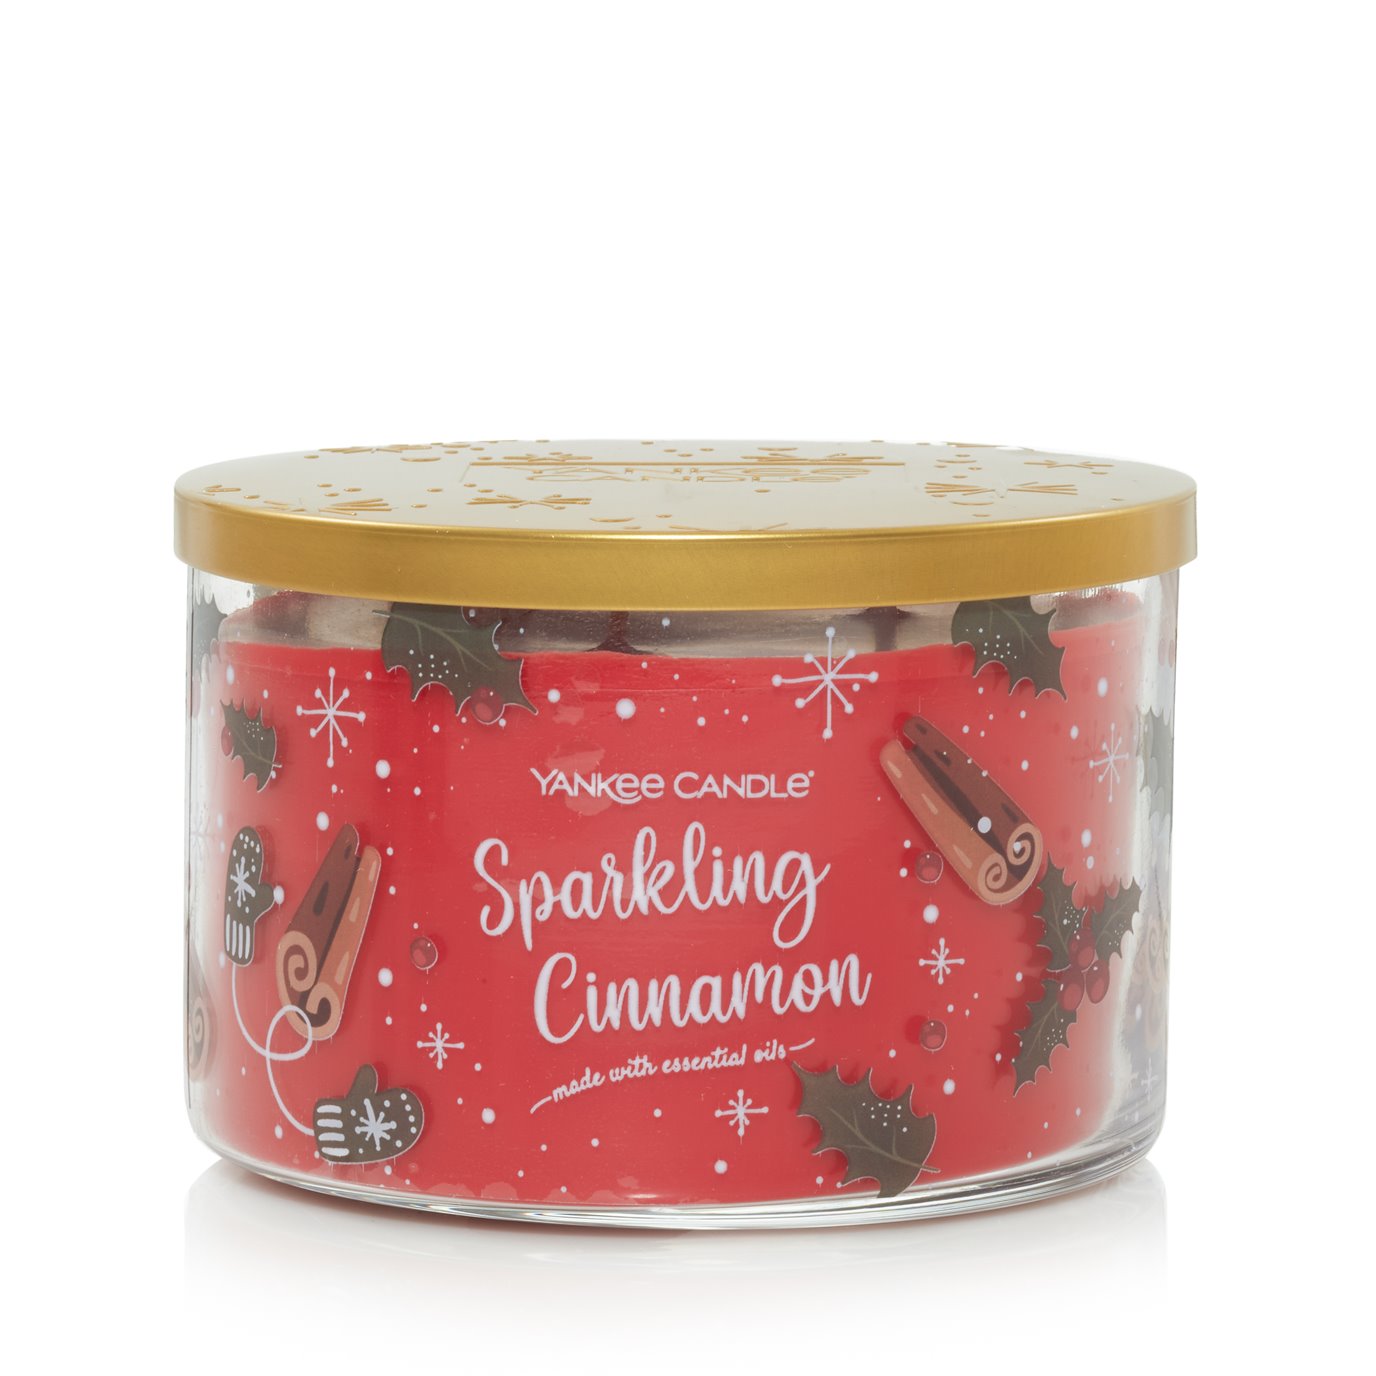 Yankee Candle Sparkling Cinnamon Limited Edition 3-Wick Holiday Tumbler Candle